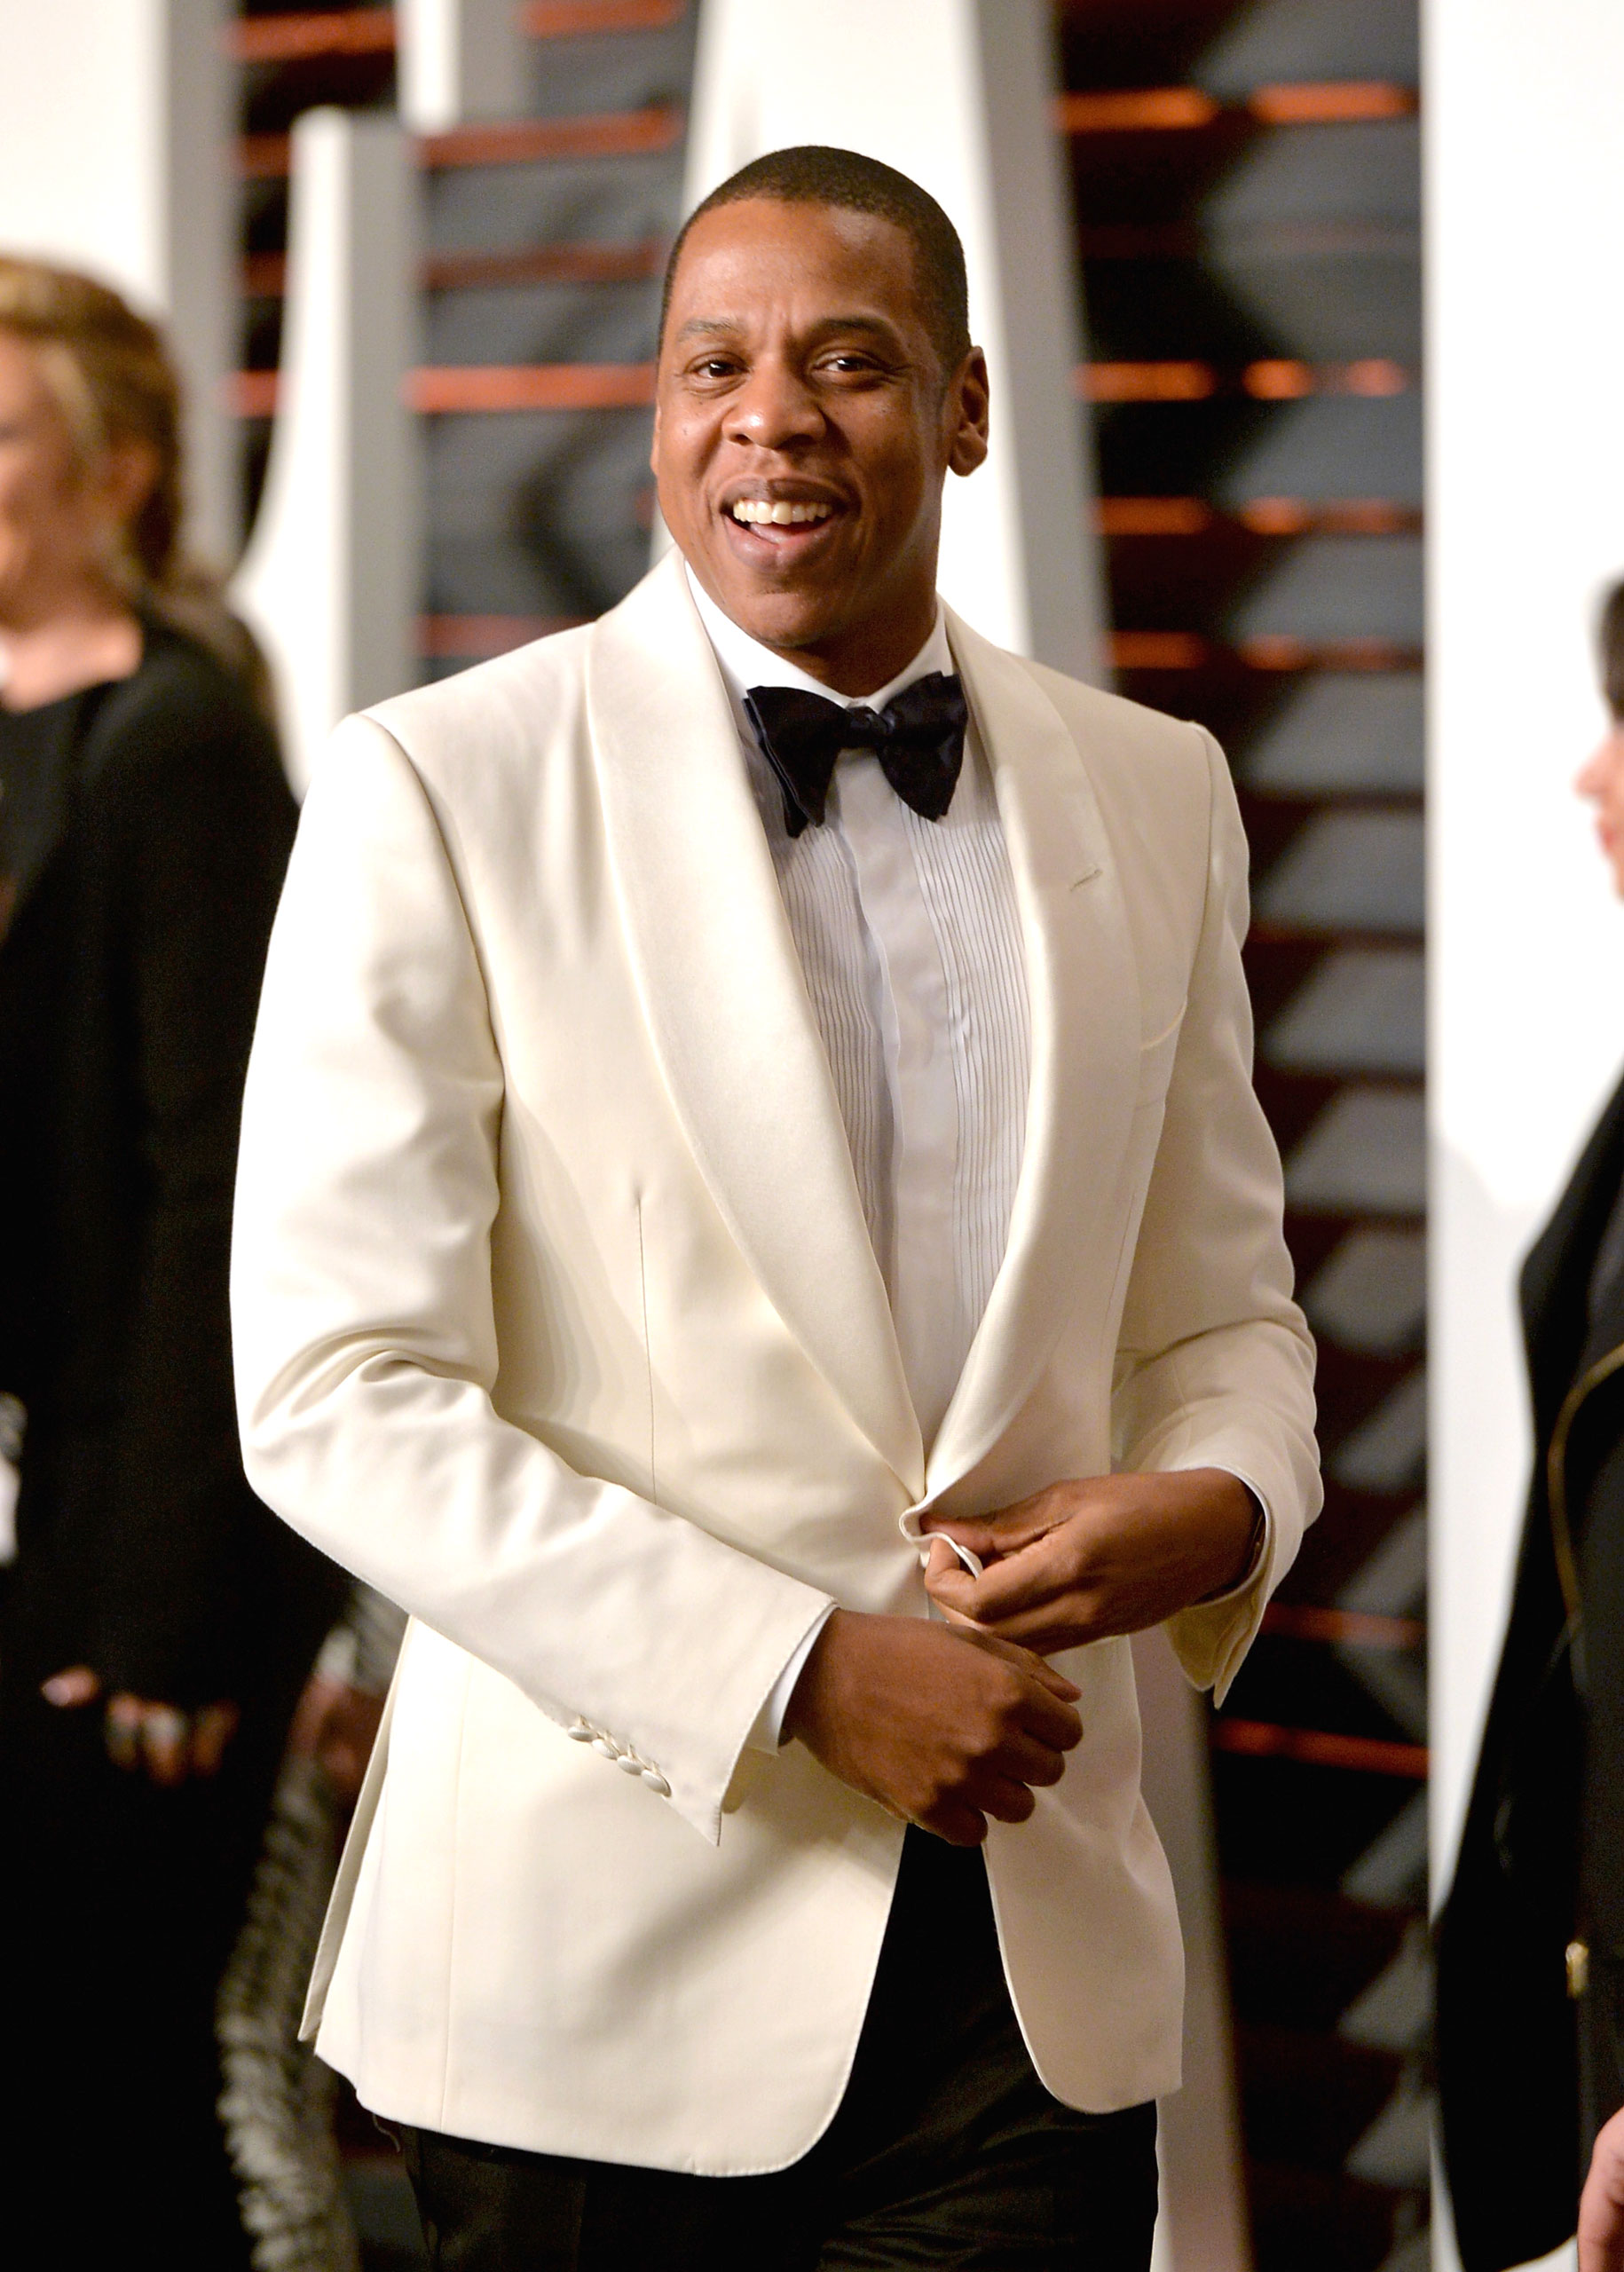 Jay-Z attends the 2015 Vanity Fair Oscar Party hosted by Graydon Carter at Wallis Annenberg Center for the Performing Arts on Feb. 22, 2015 in Beverly Hills, Calif.